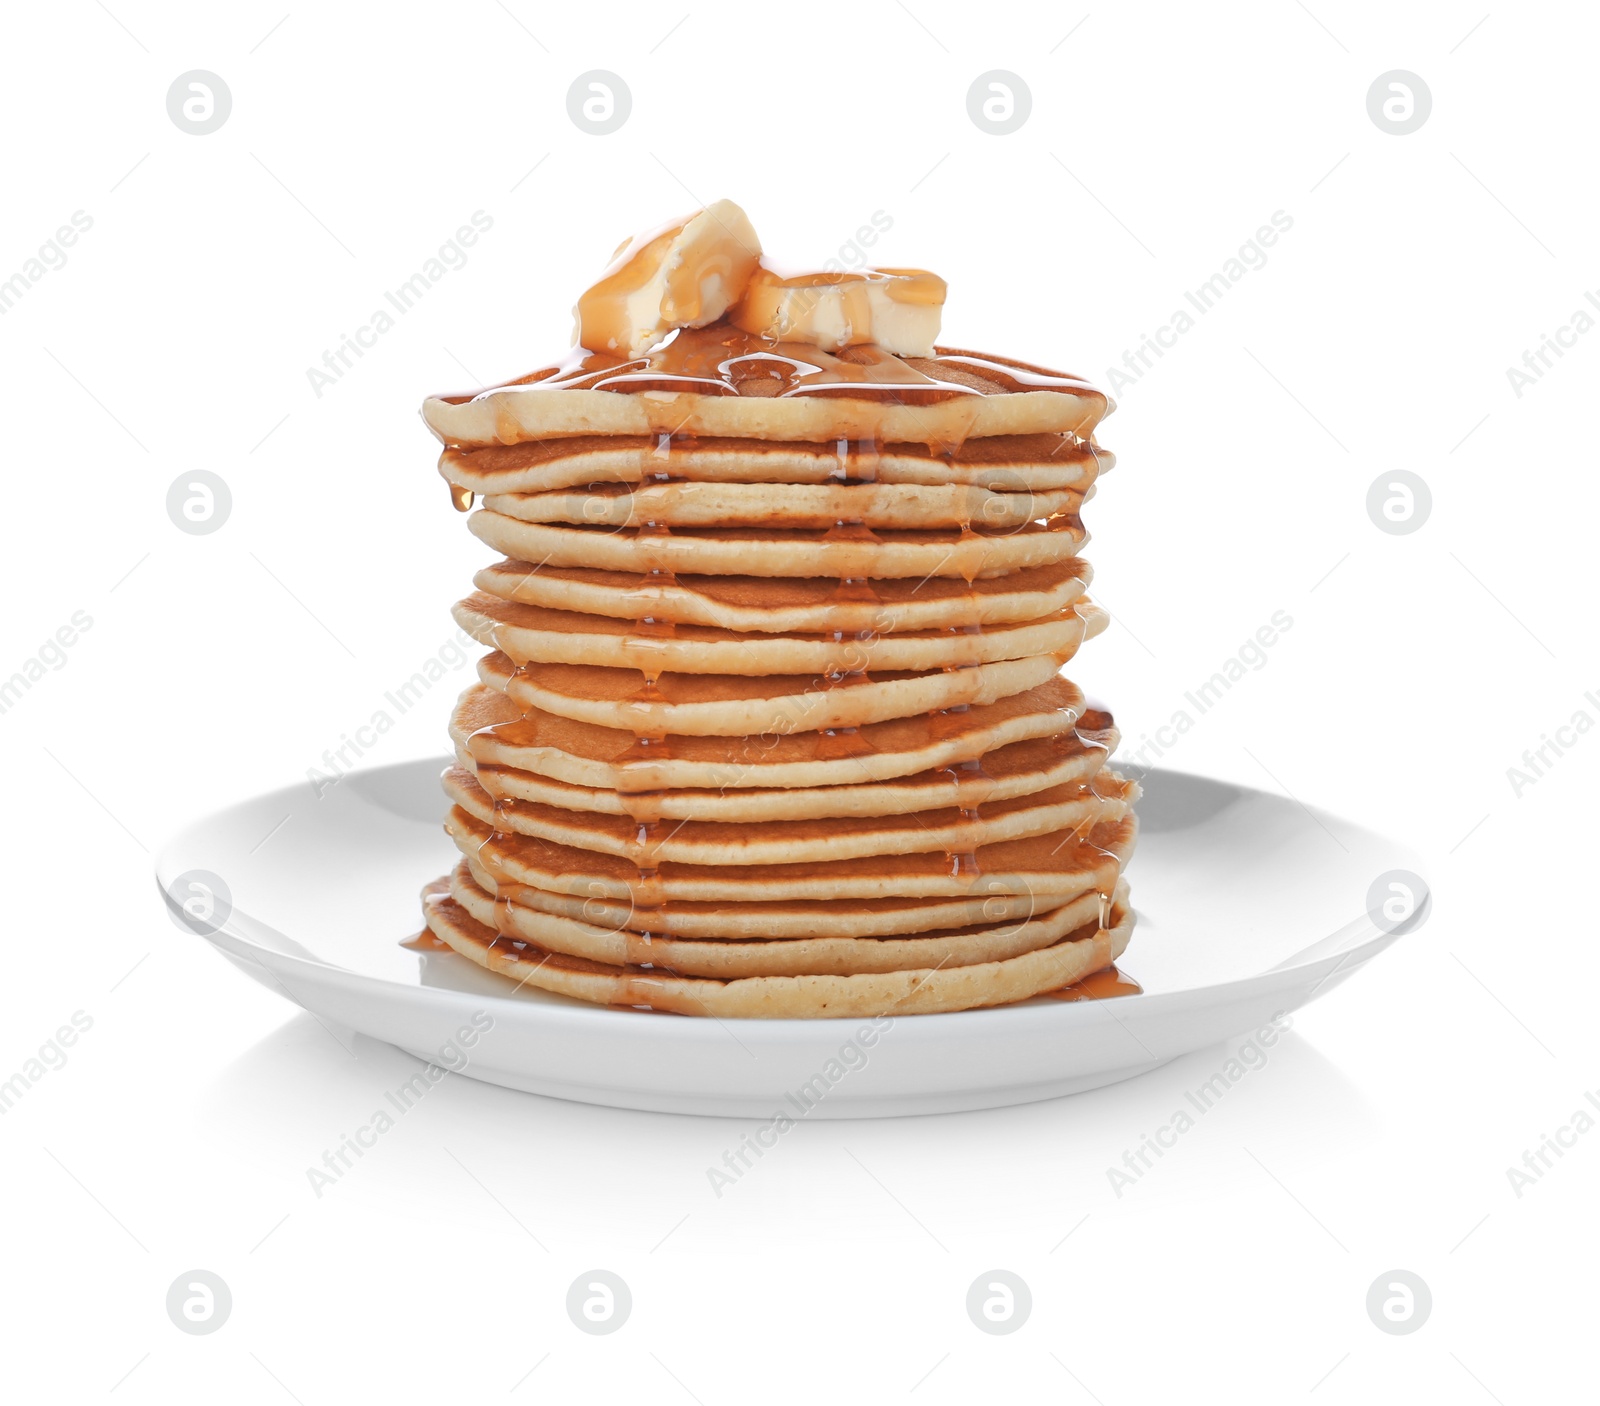 Photo of Plate with stack of tasty pancakes and maple syrup on white background